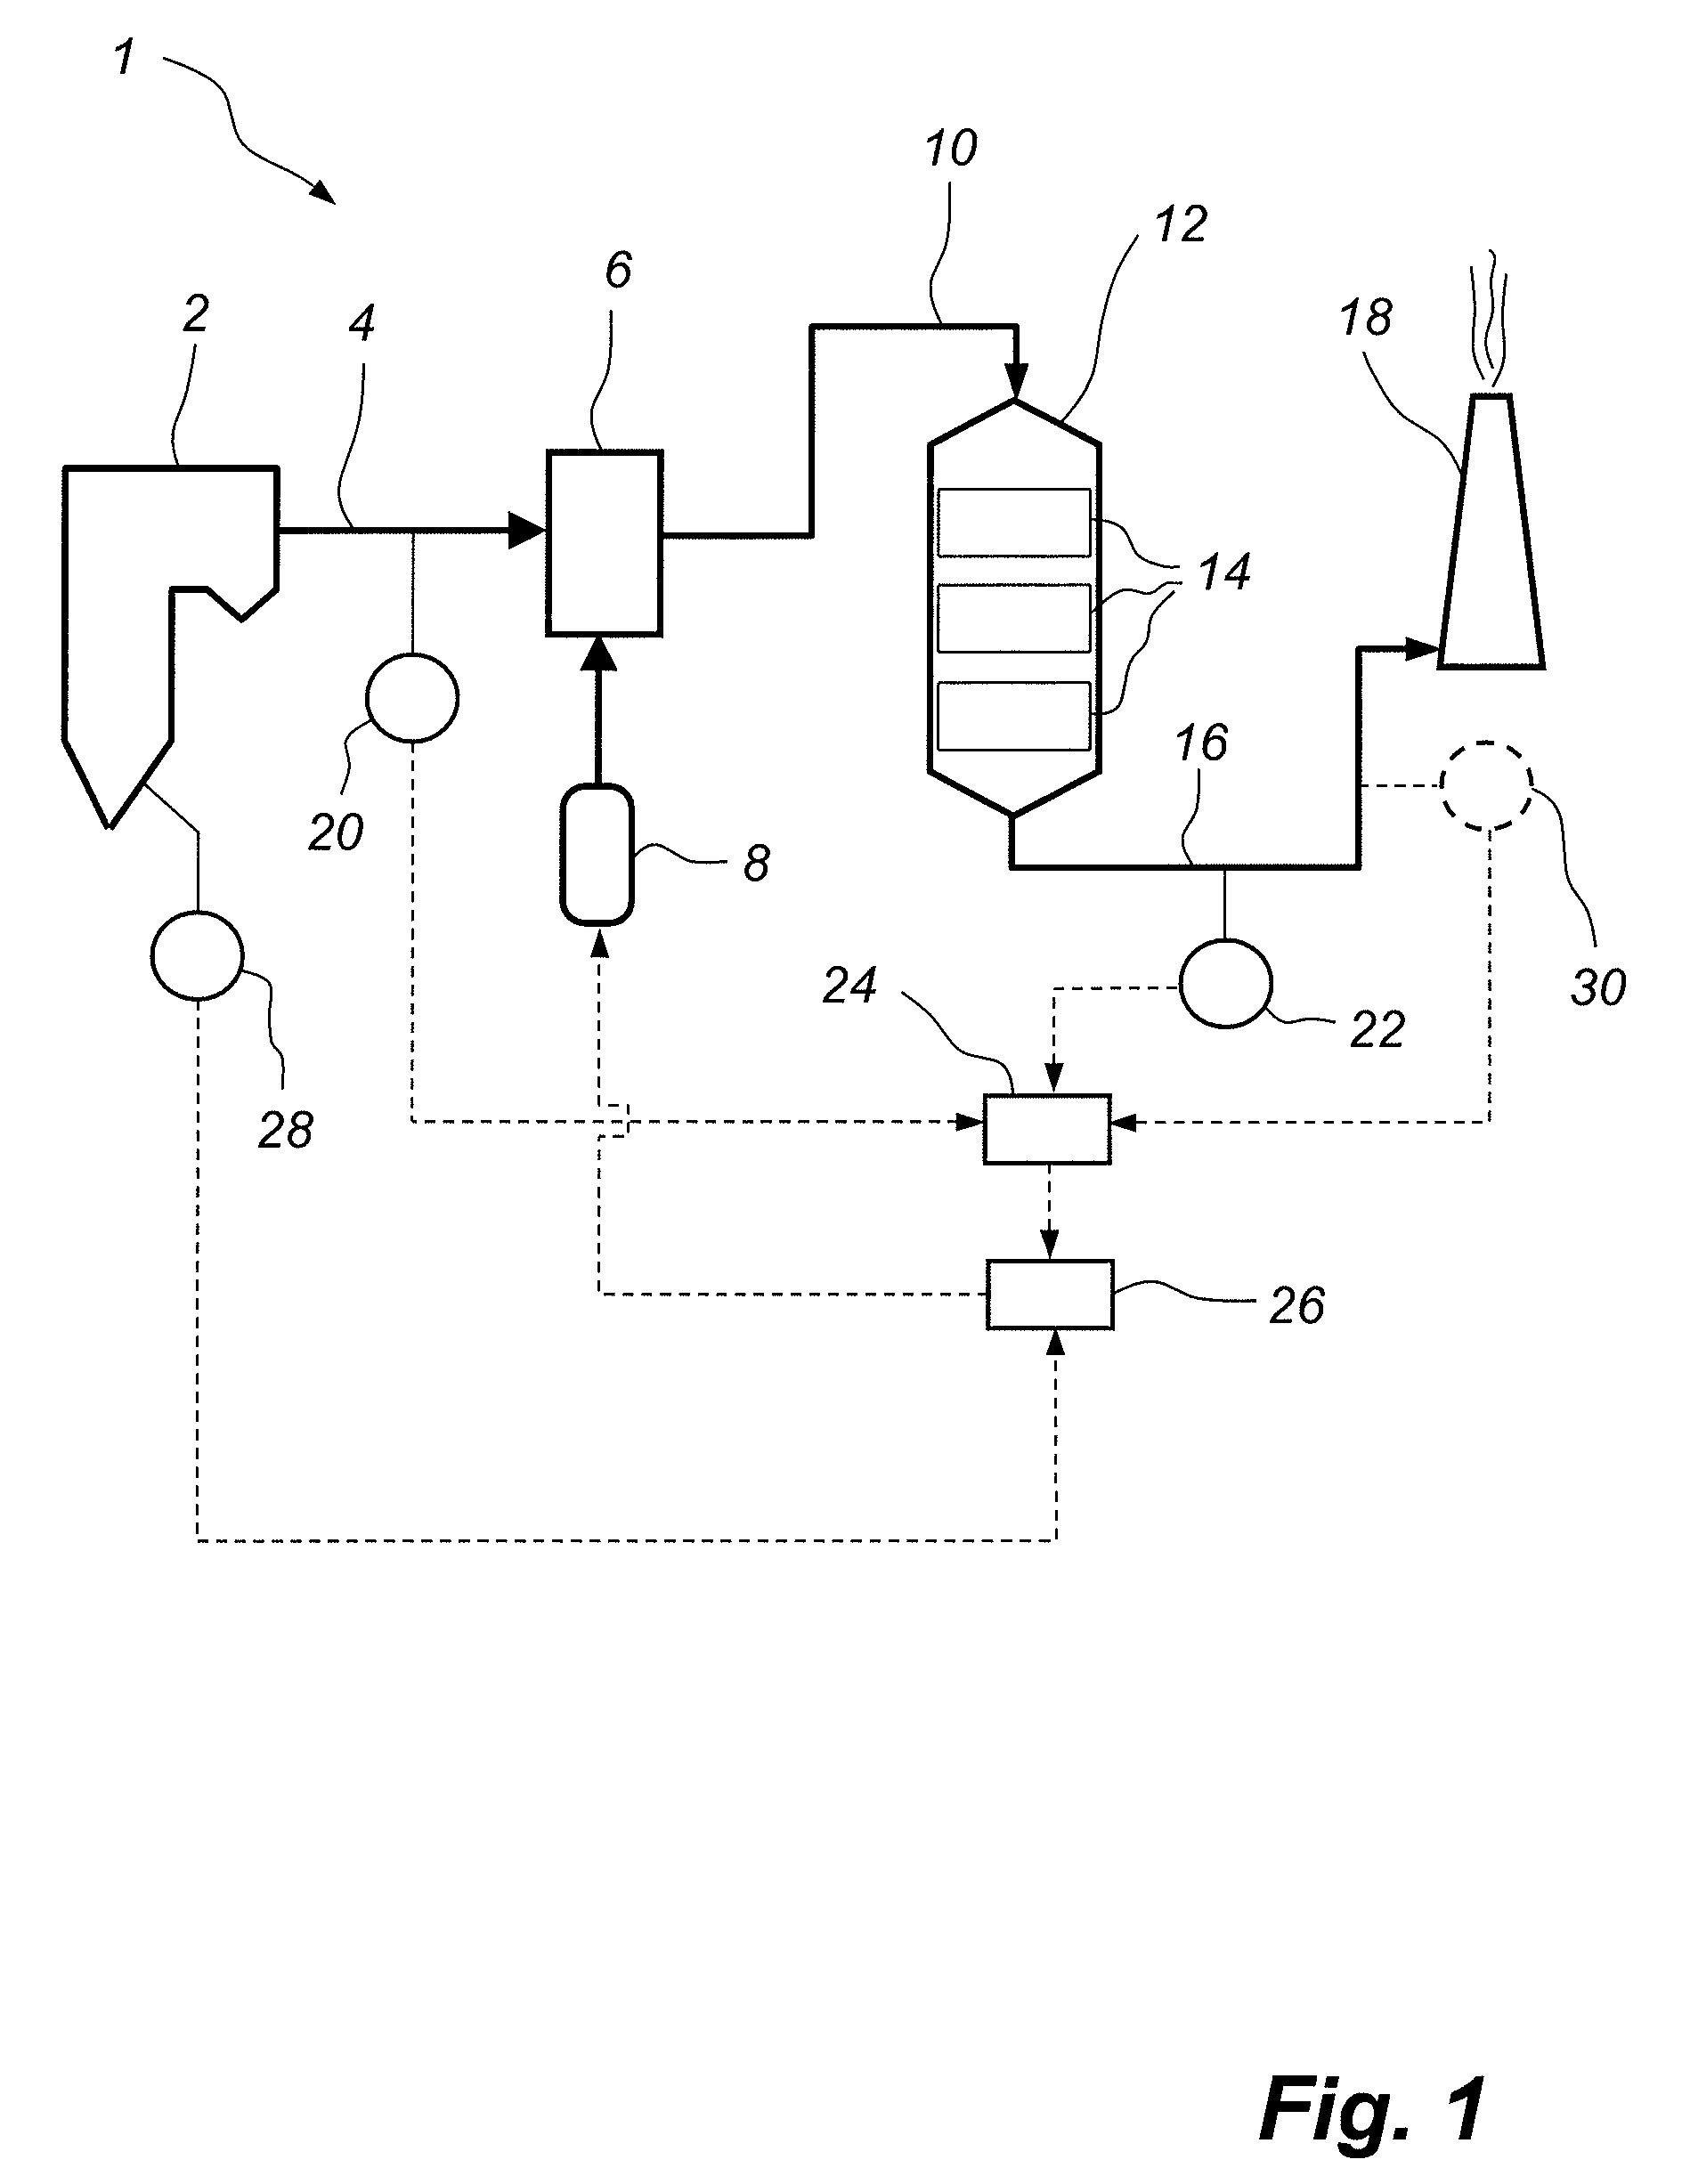 Method of controlling the operation of a selective catalytic reduction plant